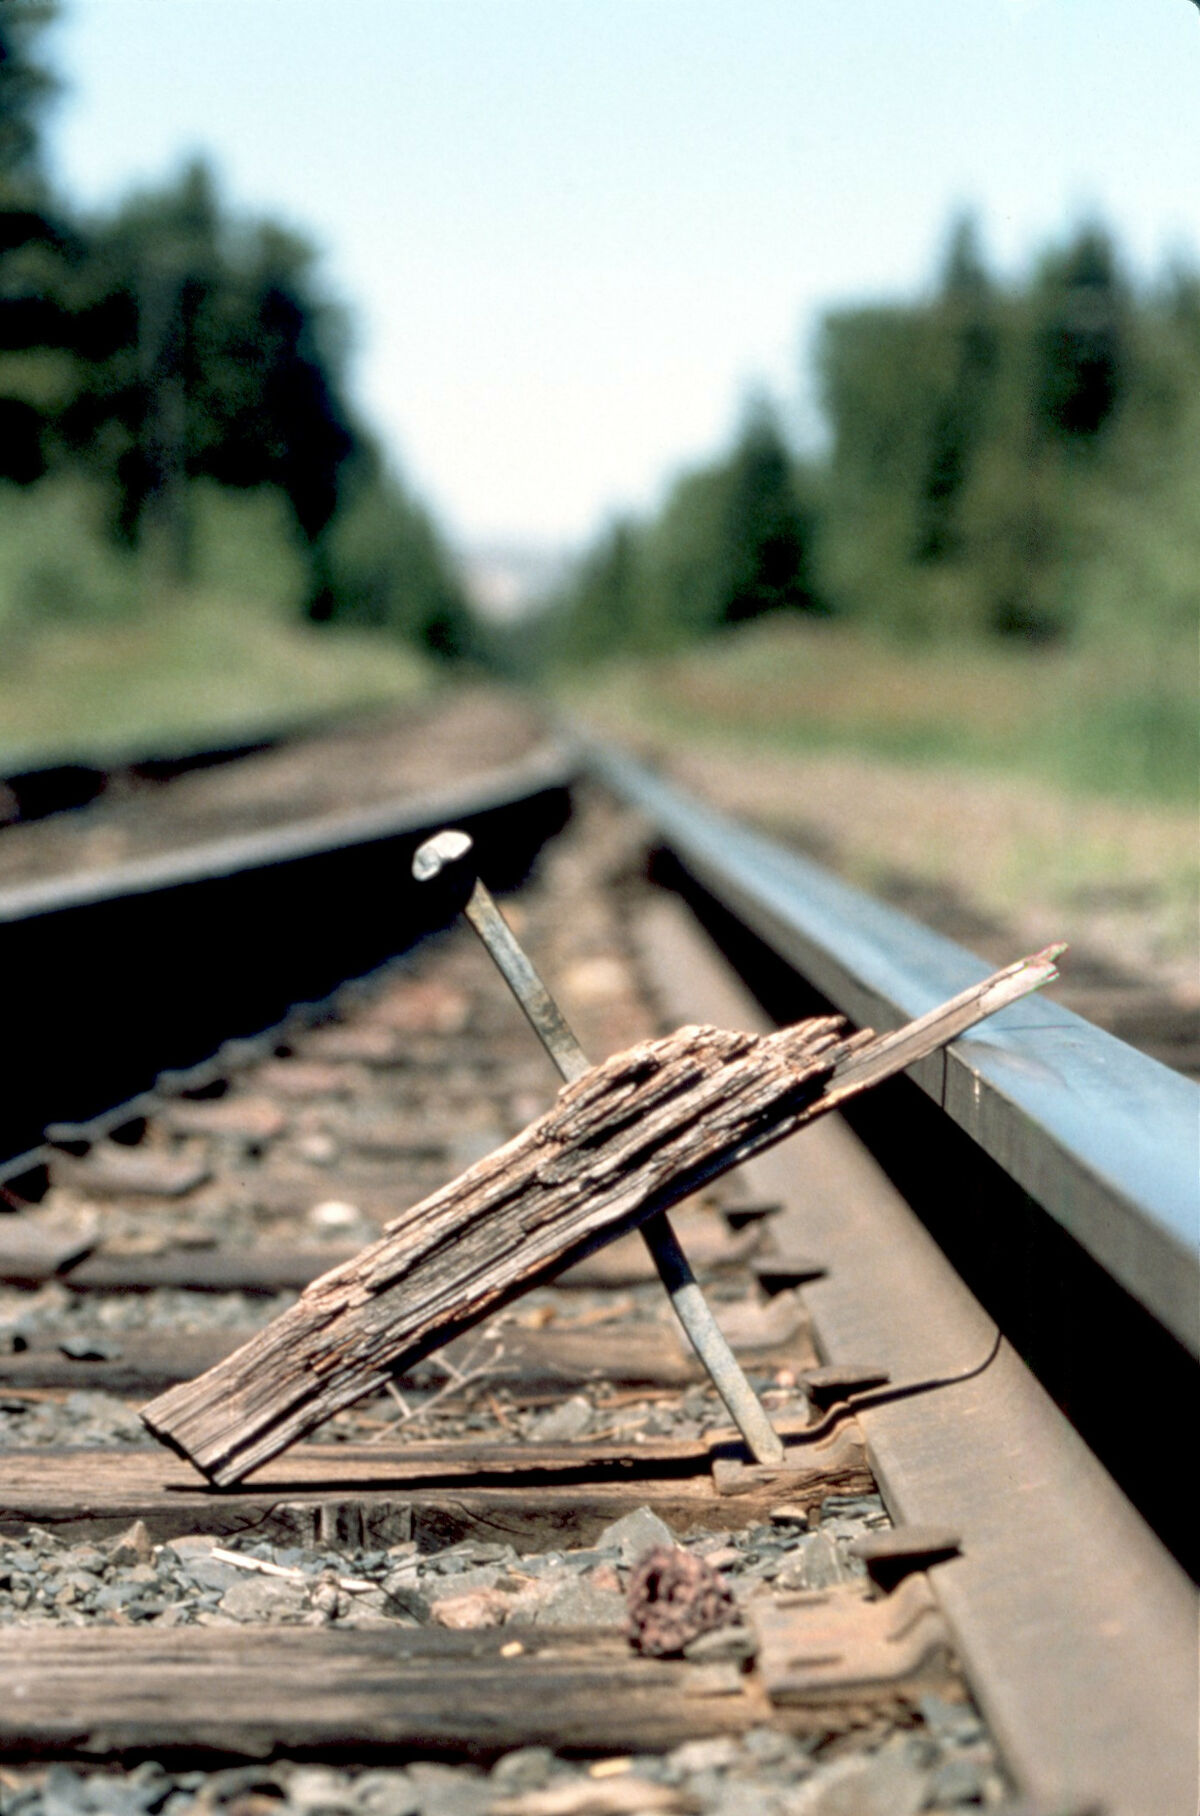 Railroad spike symbolizing the end of railroad logging in the Wallowa country. Taken by Steve Roundy.